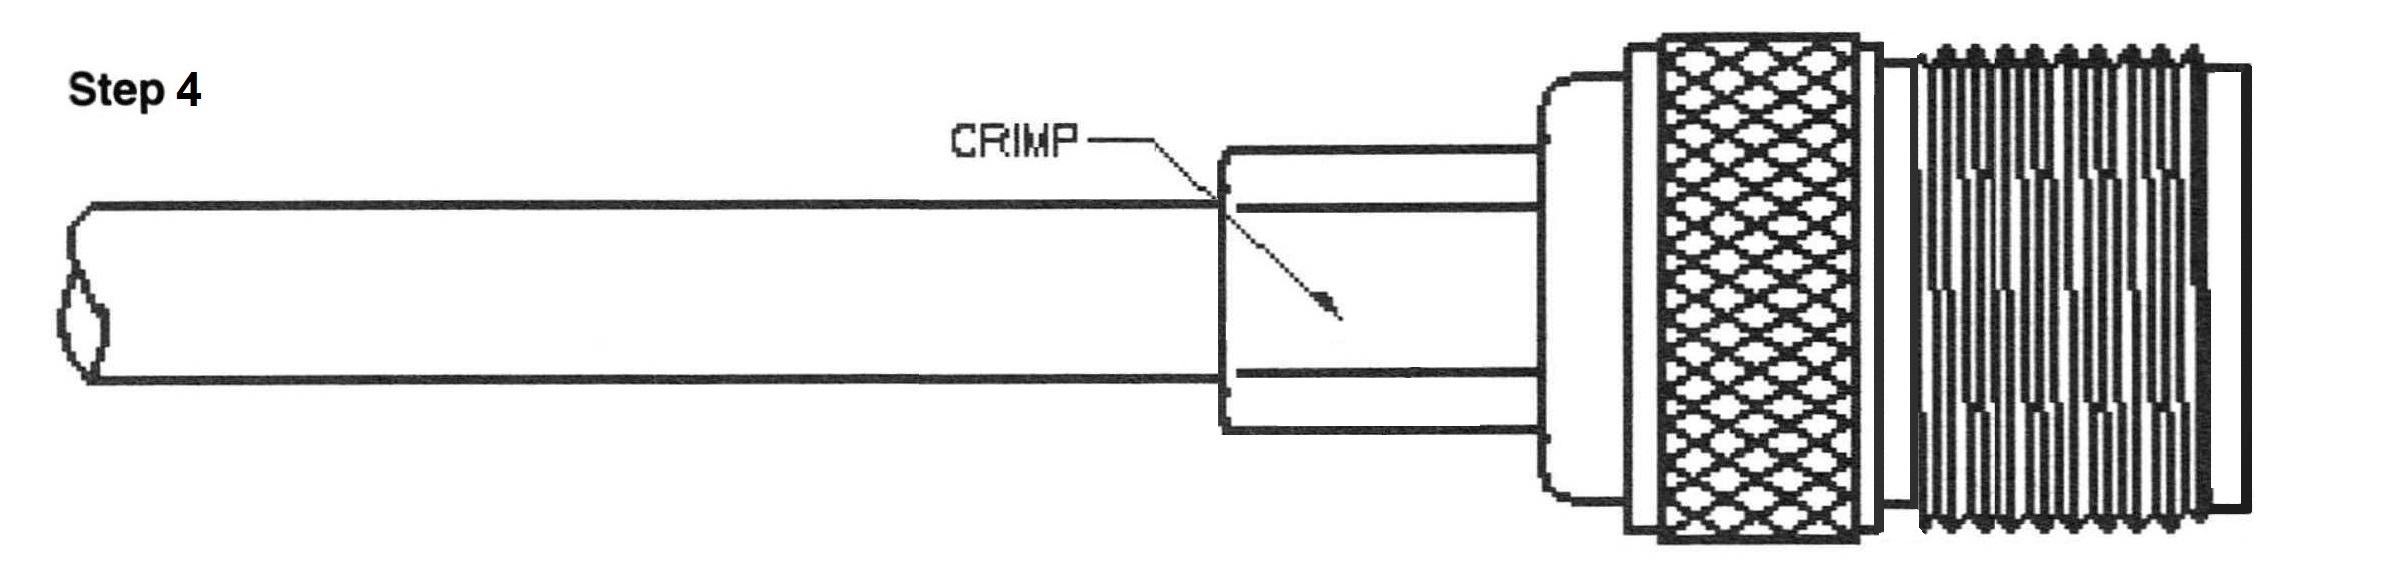 Type N female Crimp On for RG-58, LMR-195 7306-N-58 Installation Guide Step 4 - Max-Gain Systems, Inc.